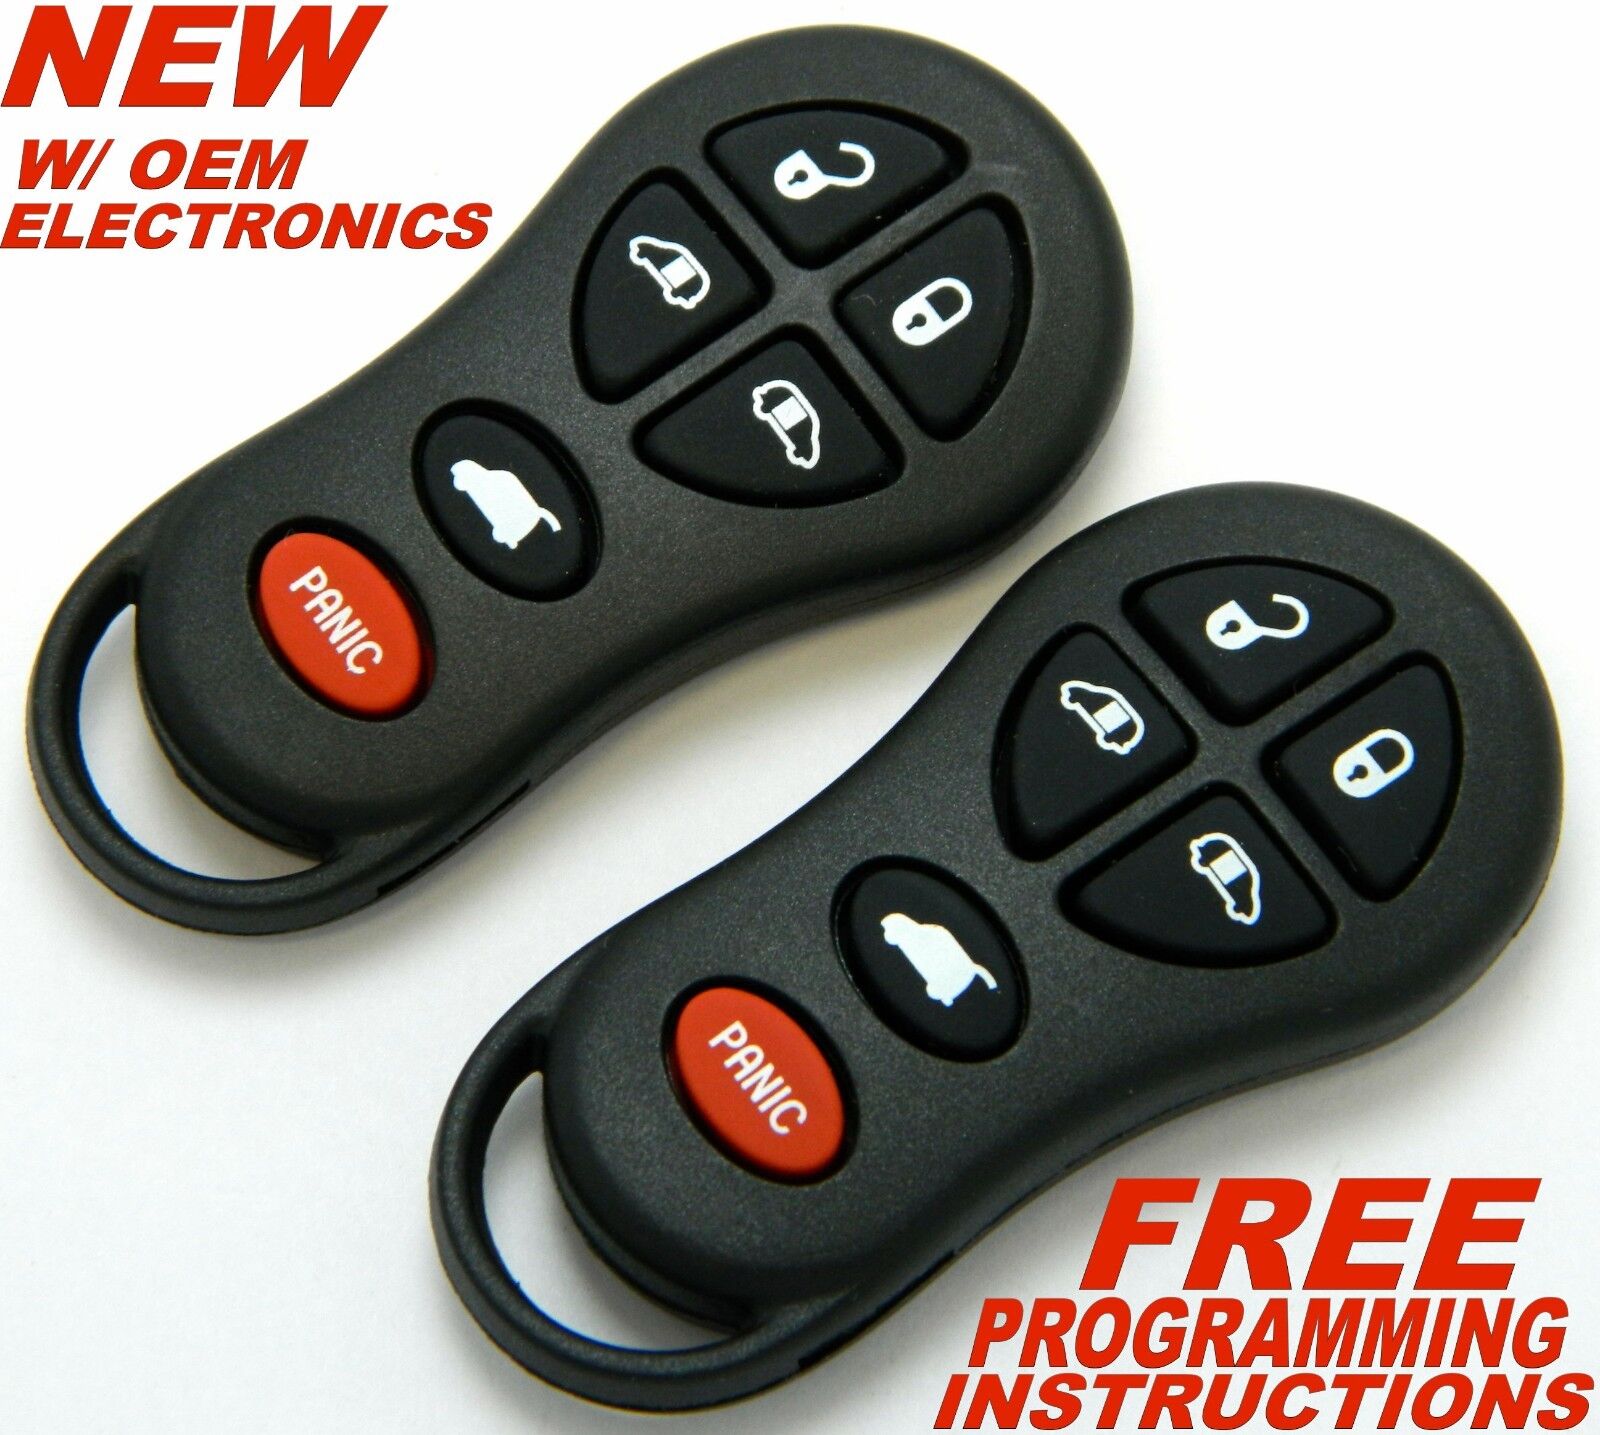 PAIR OEM ELECTRONIC KEYLESS REMOTE FOBS FOR 2001 - 2003 DODGE GRAND CARAVAN 